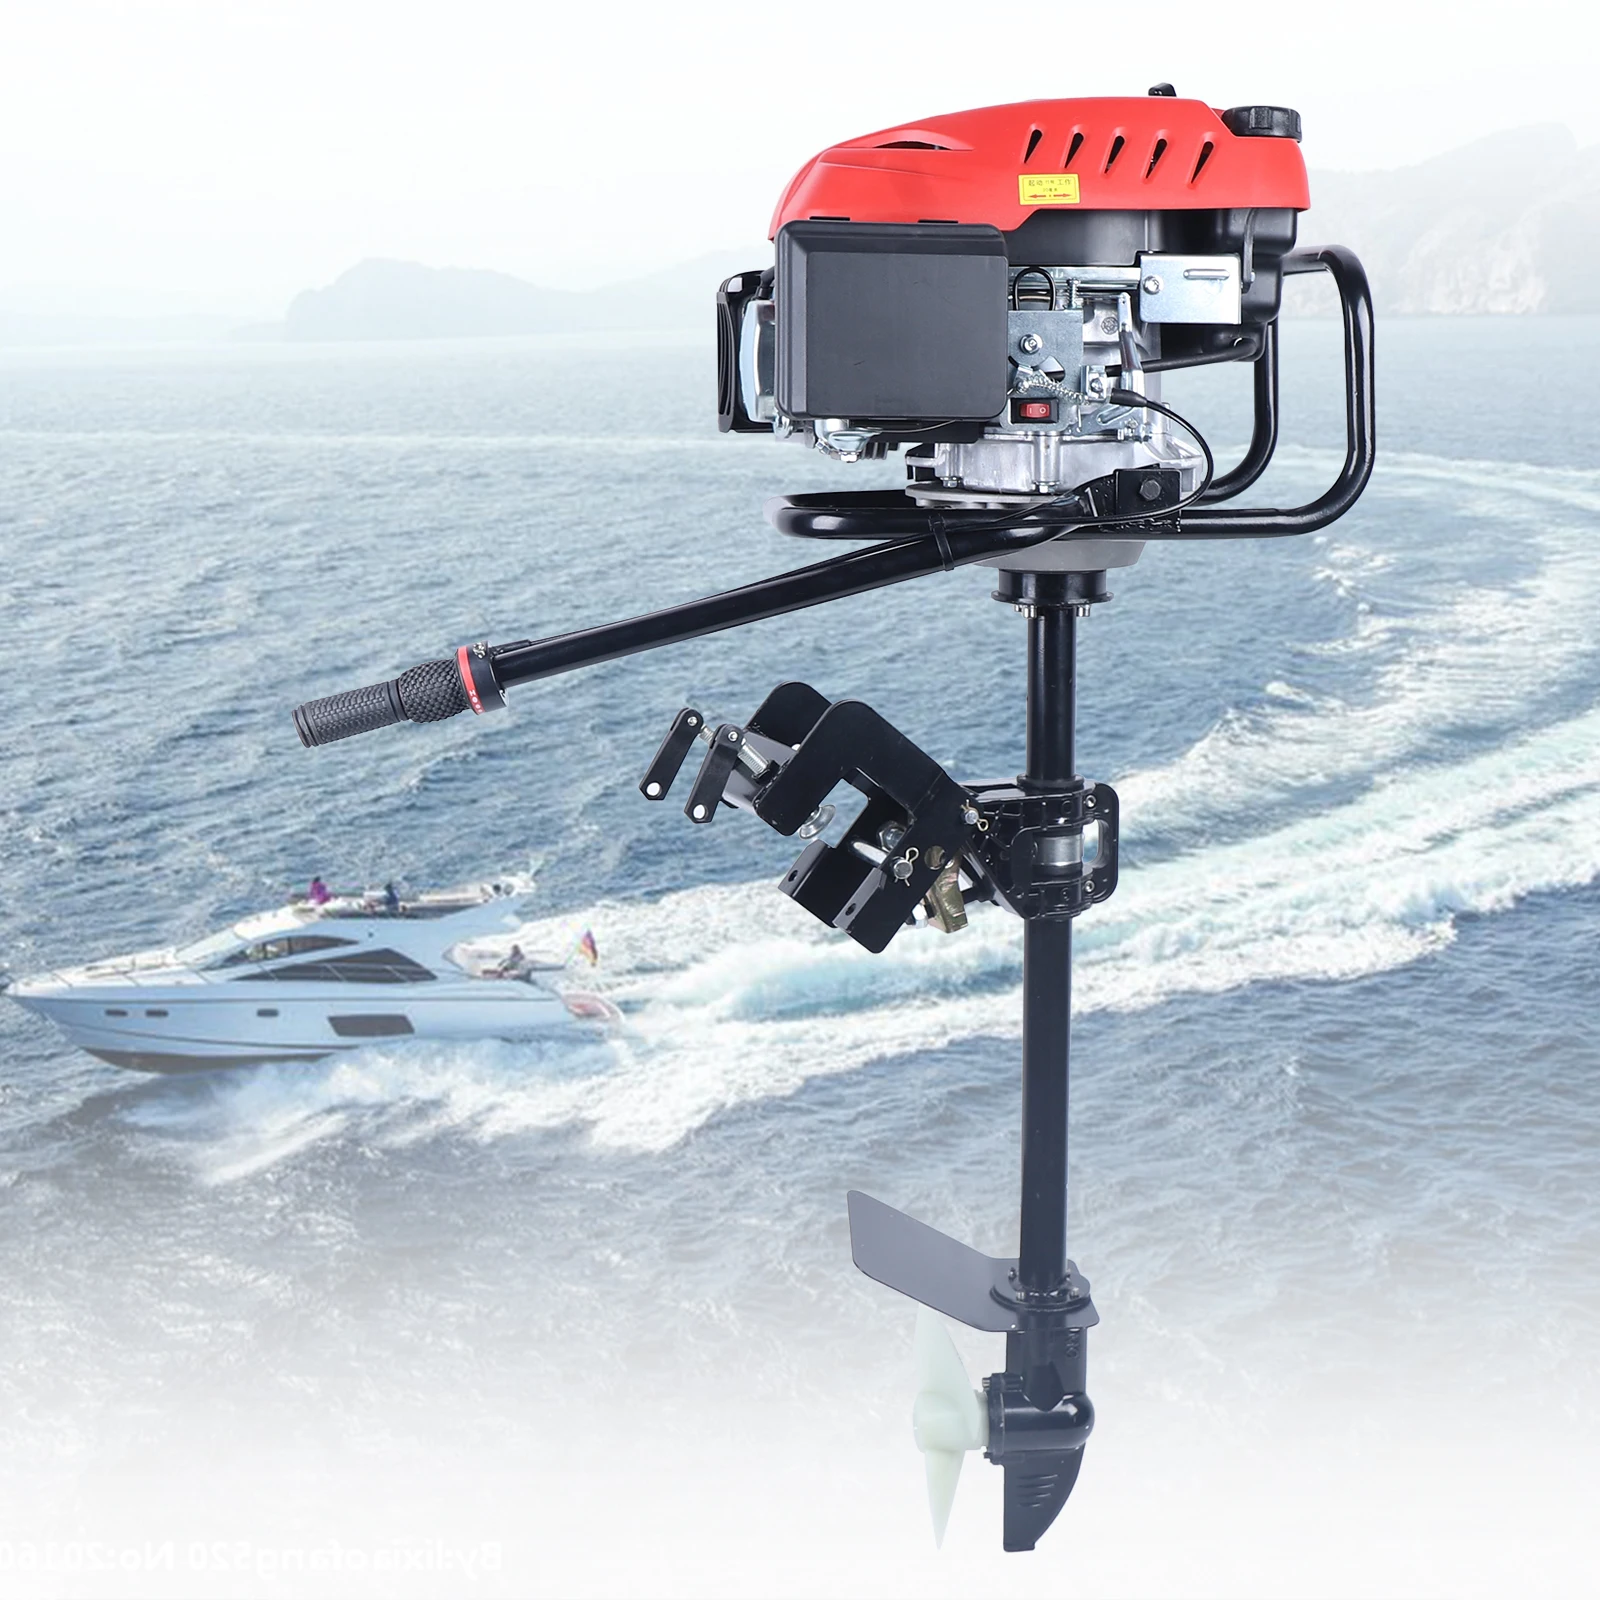 3.2KW Heavy Duty Outboard Motor 4 Stroke Fishing/Marine Boat Engine Air Cooling US 4 6 hp 4 stroke gas electric outboard motor fishing boat trolling engine air cooling 3750w